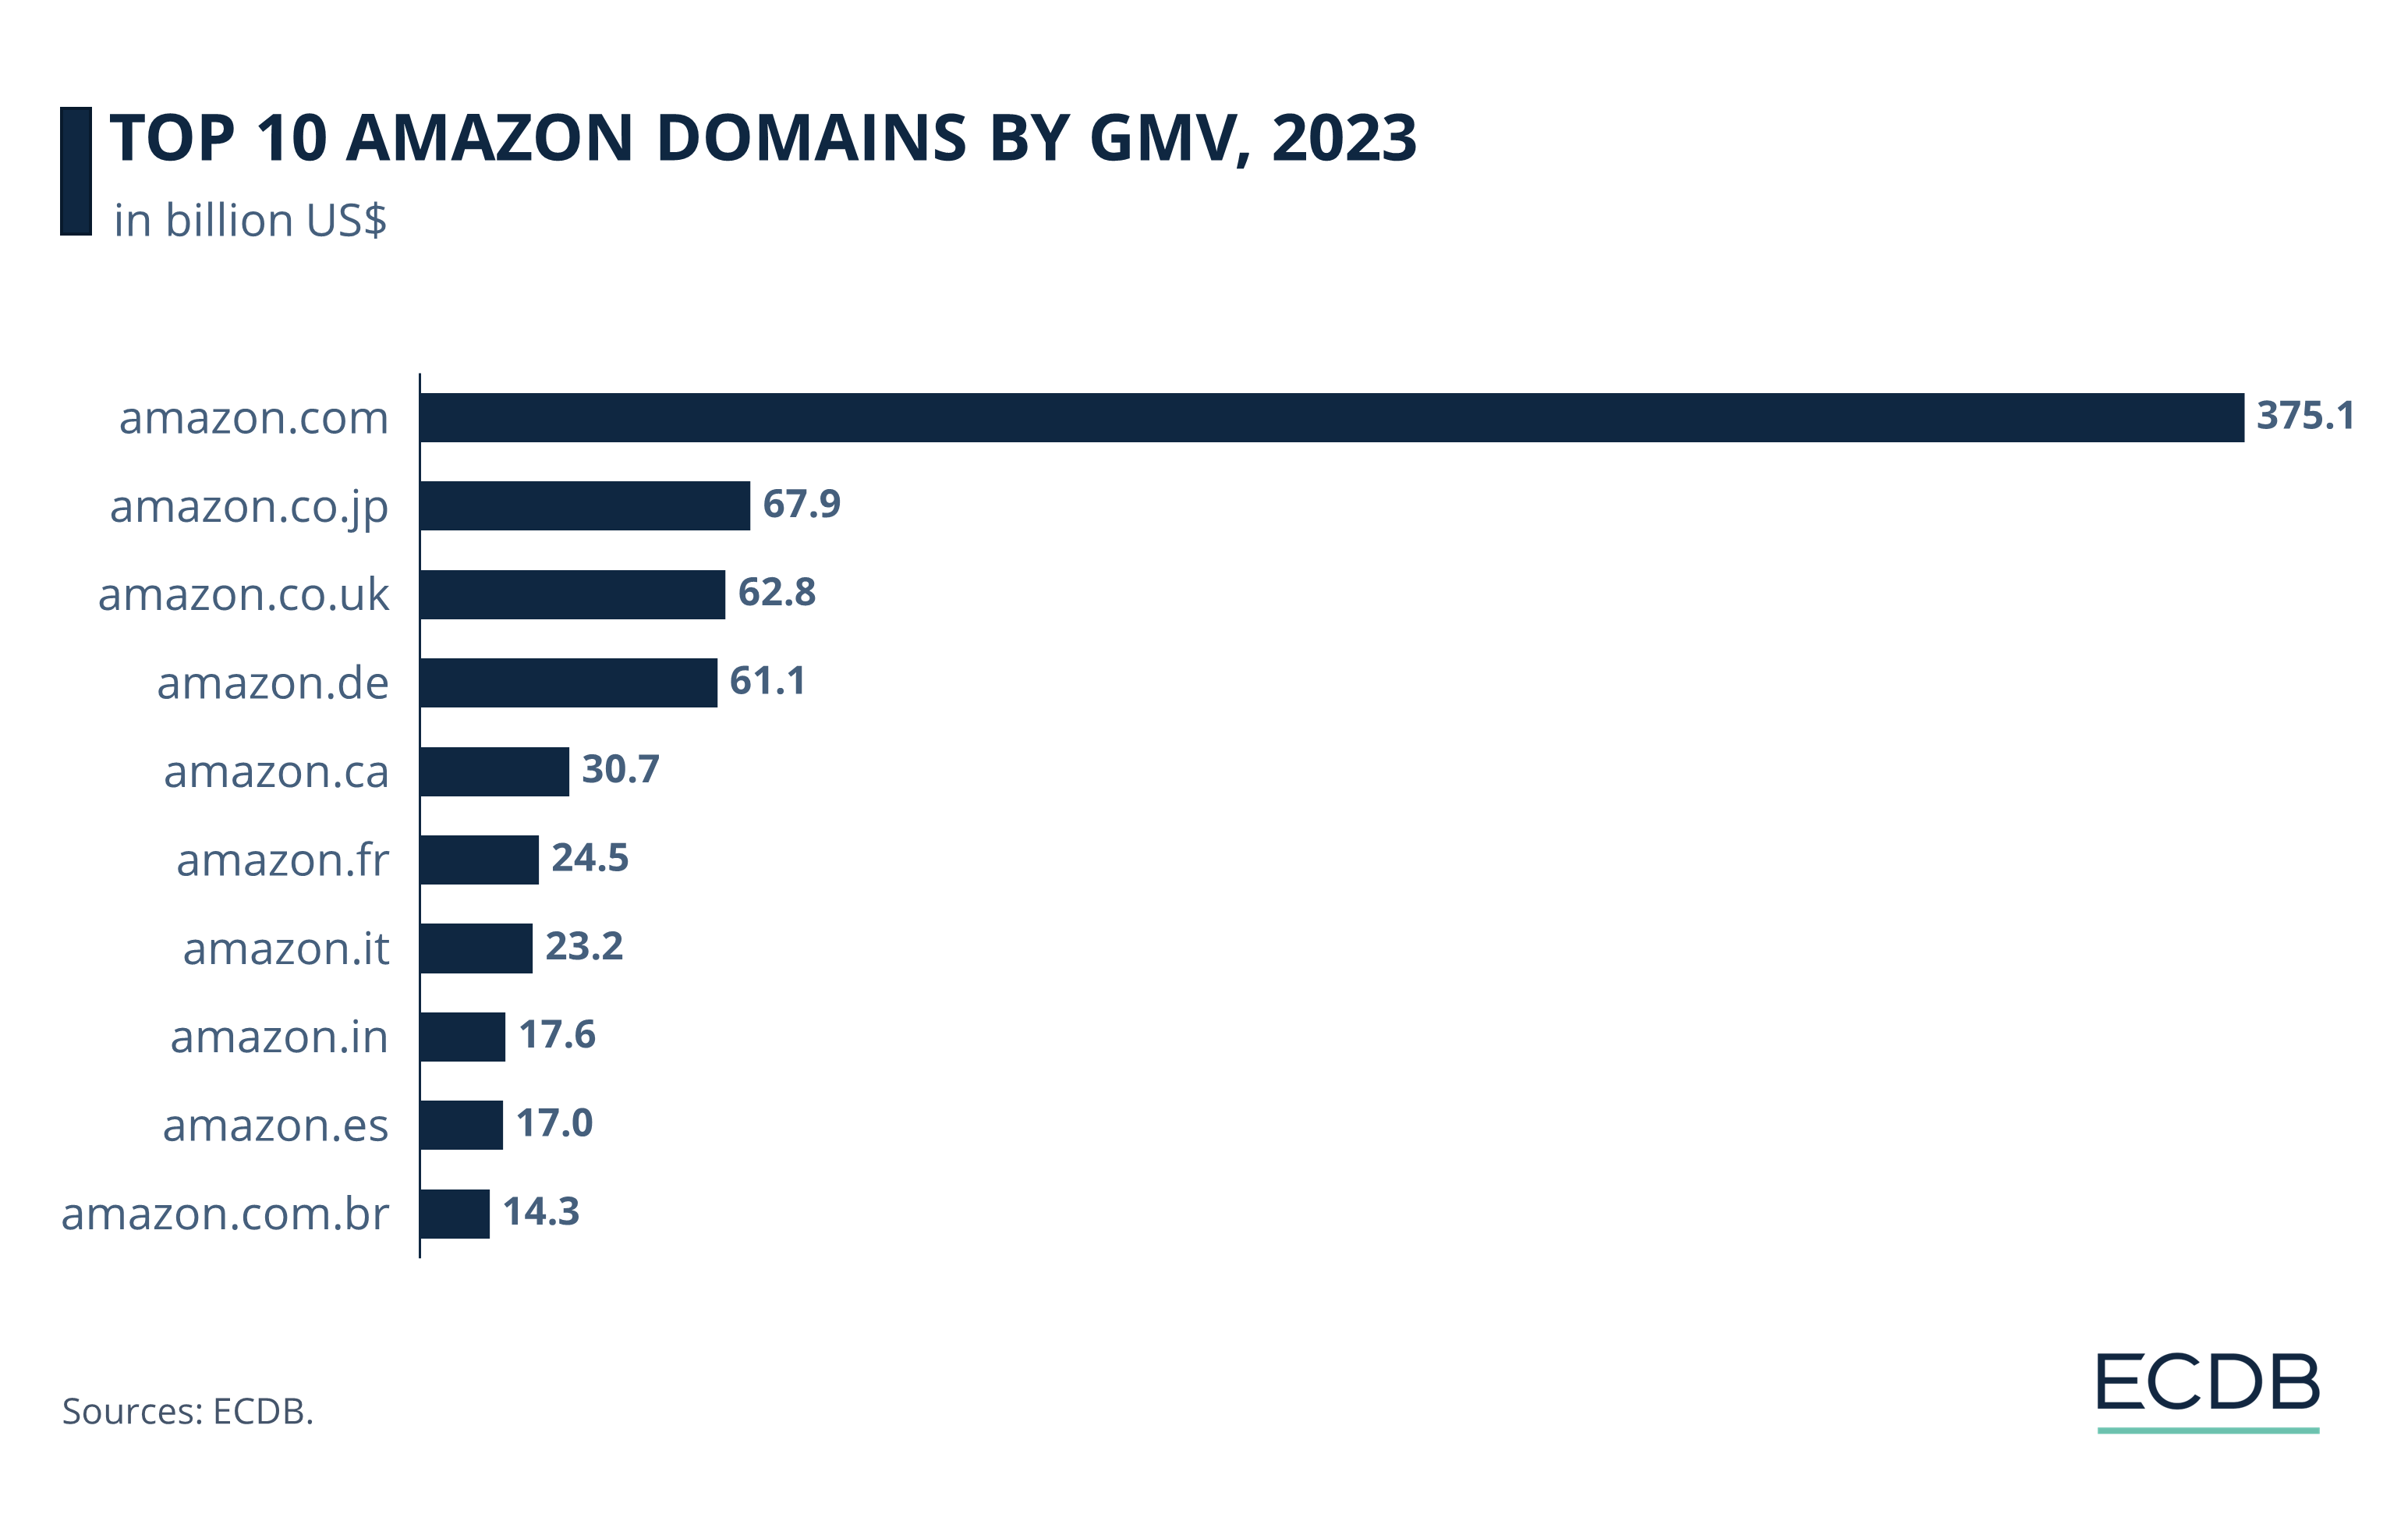 Top 10 Amazon Domains by GMV, 2022